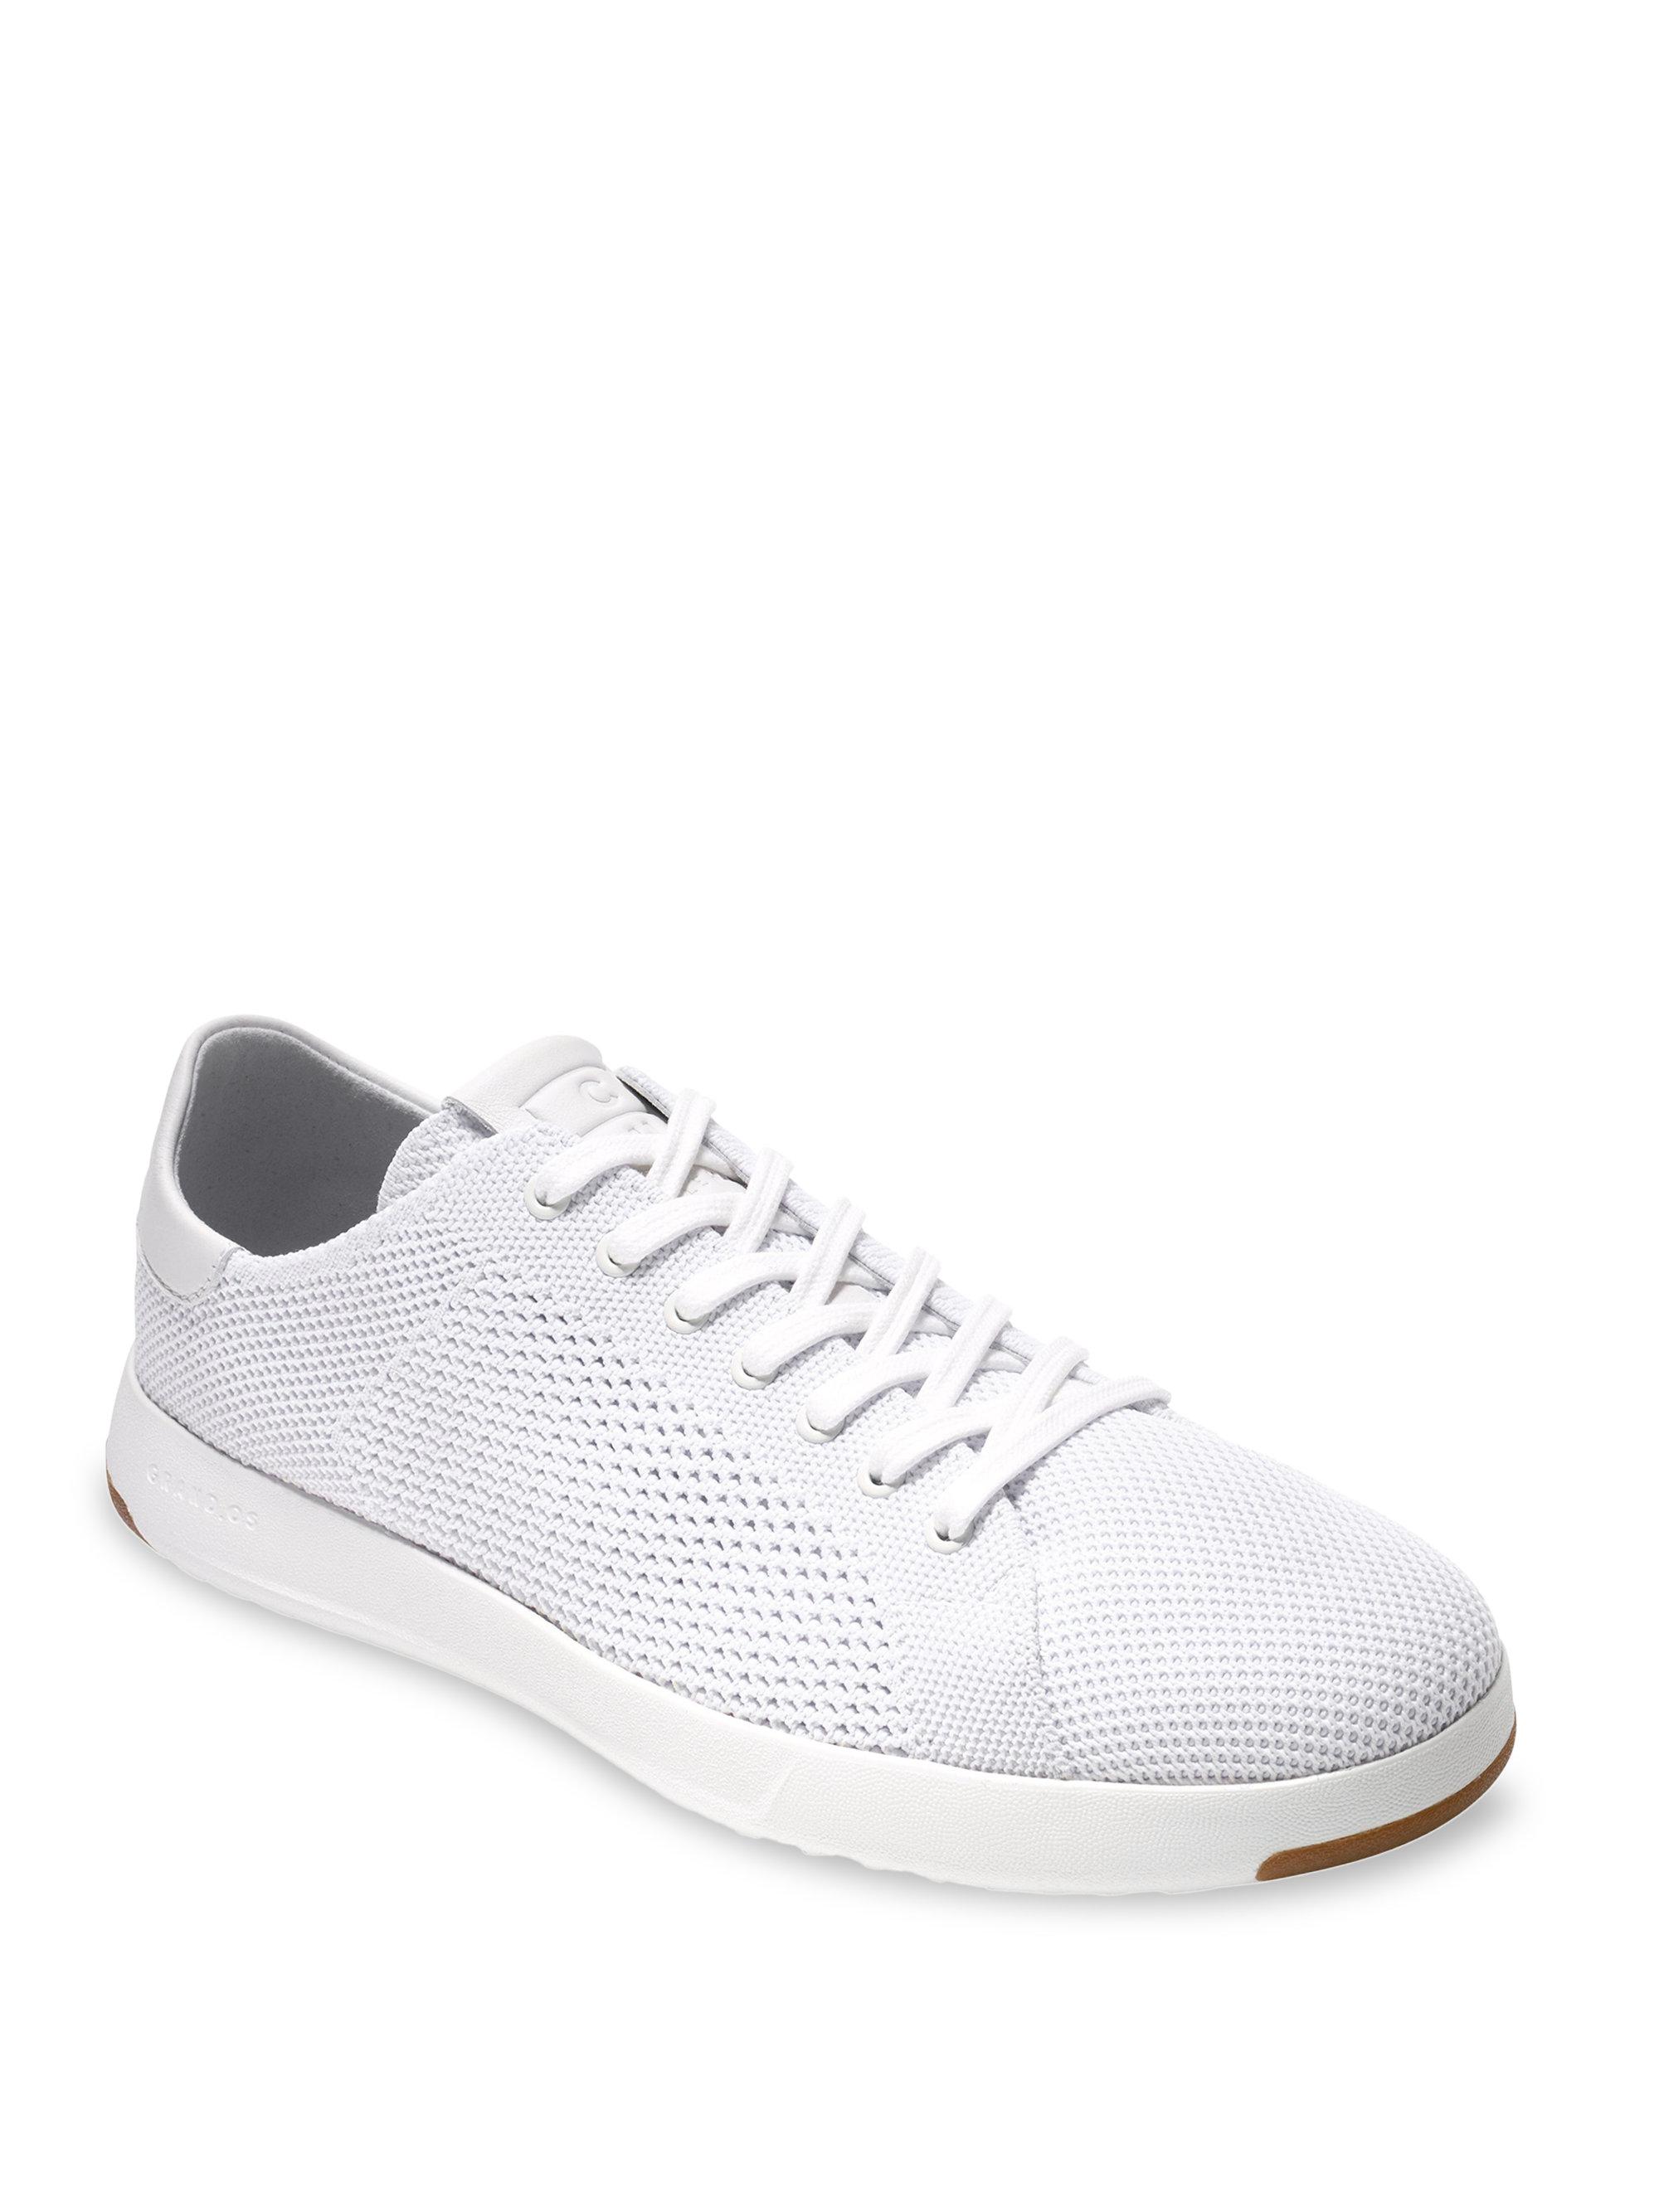 Lyst - Cole Haan Grandpro Tennis Stitchlite Sneakers in ...